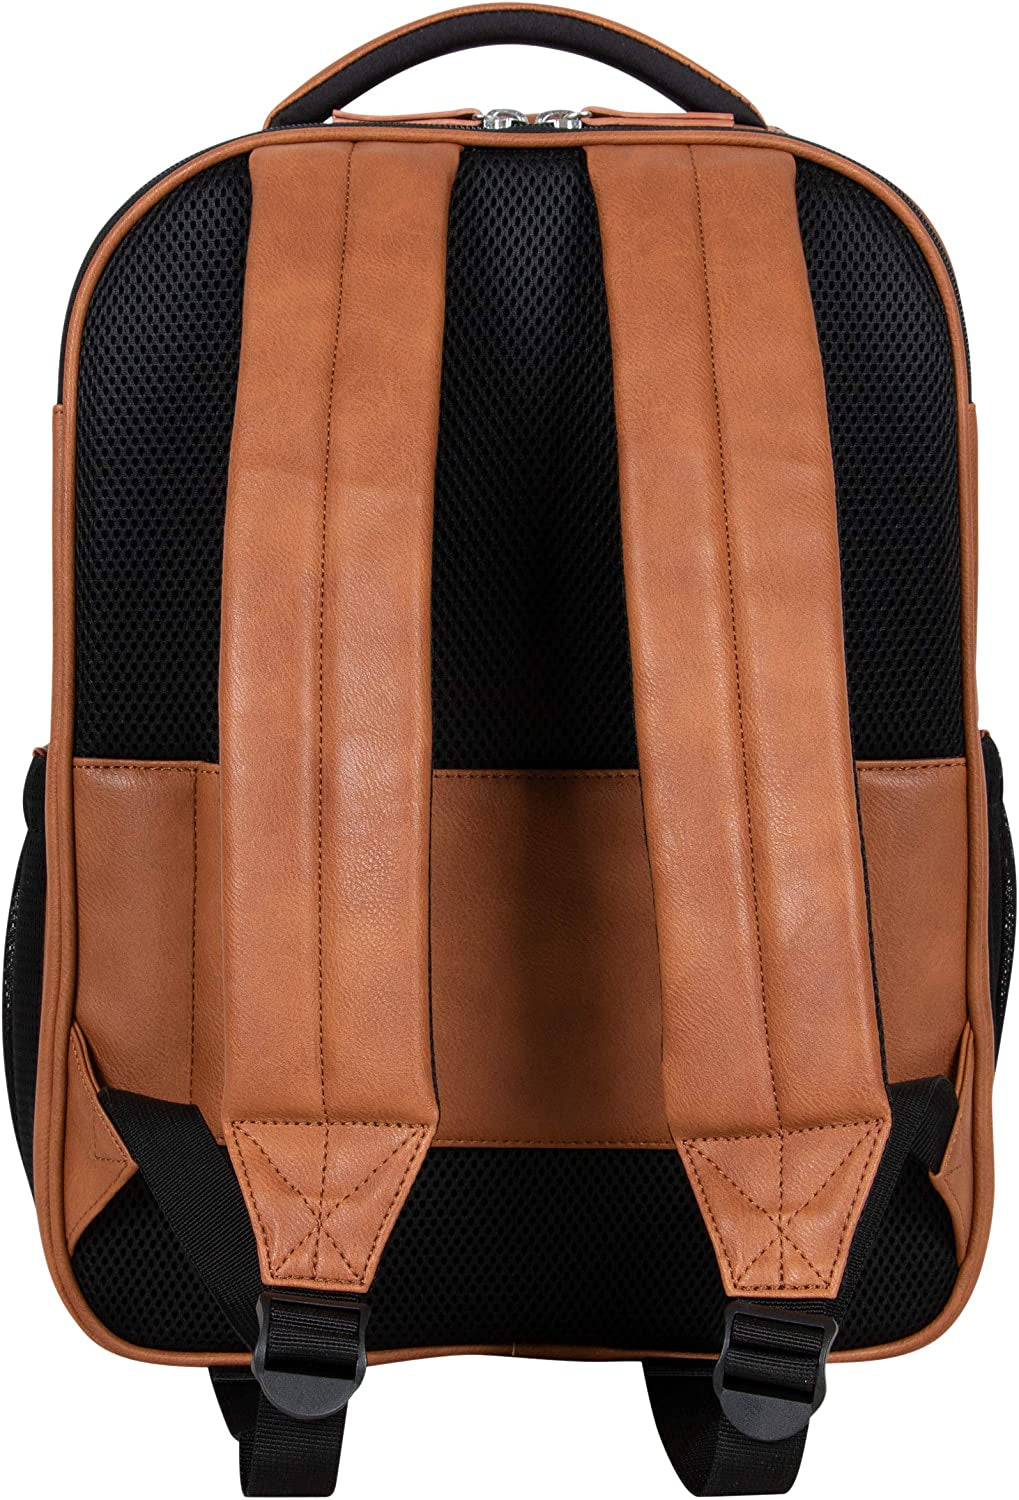 Professional Title: "Premium Vegan Leather Tablet Bookbag with Anti-Theft RFID, Ideal for Work and Travel, Cognac, 15.6" Laptop Backpack"